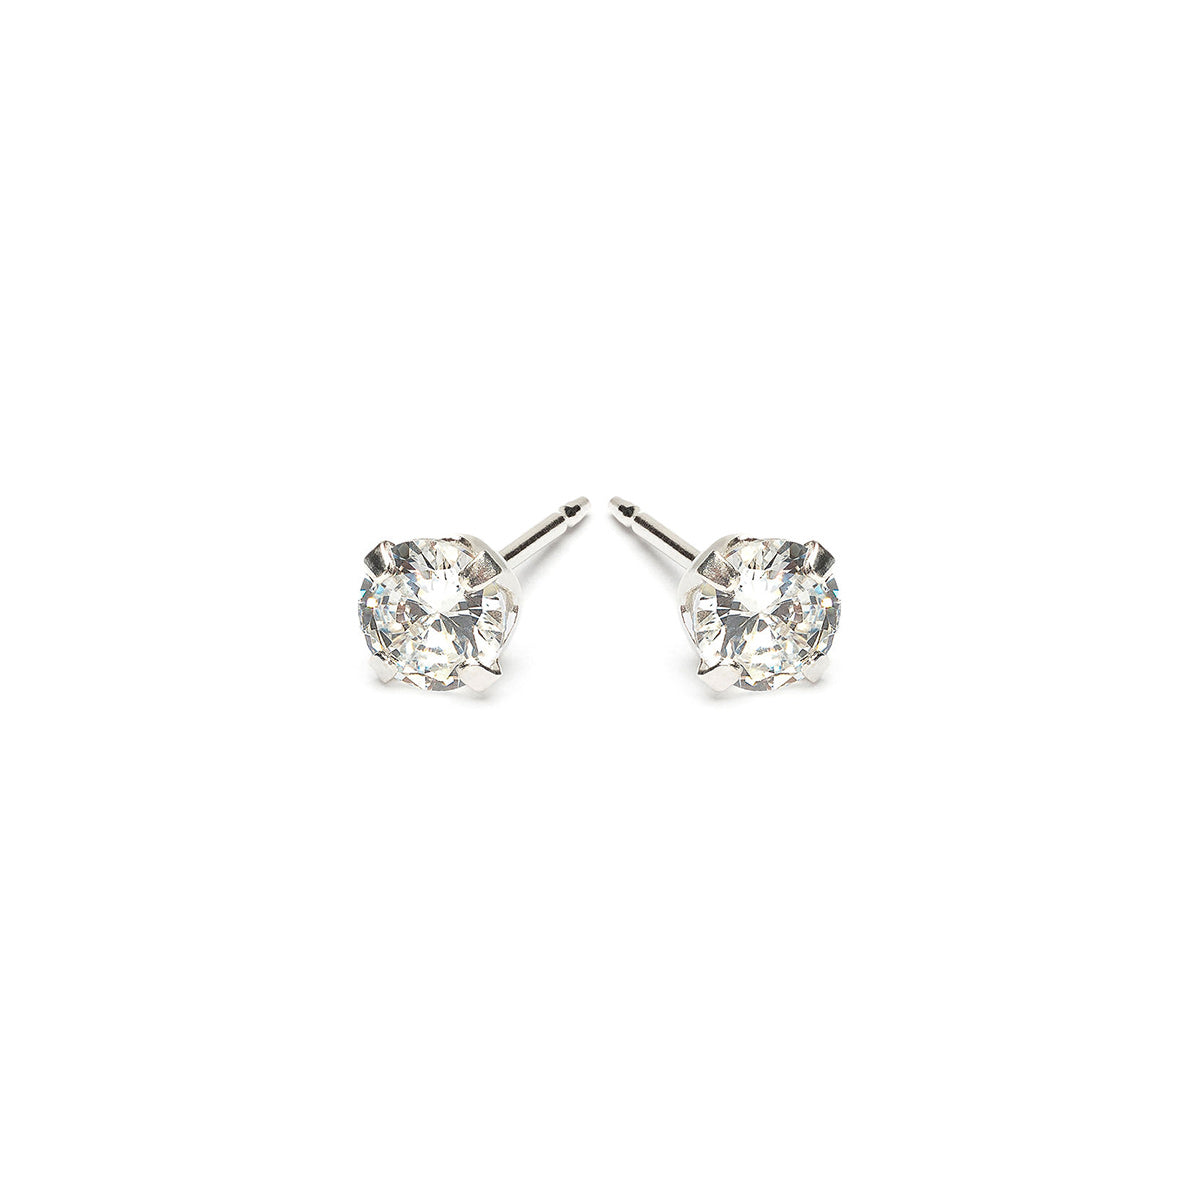 Sterling Silver 4 mm Round Cubic Zirconia Stud Earrings - Simply Whispers